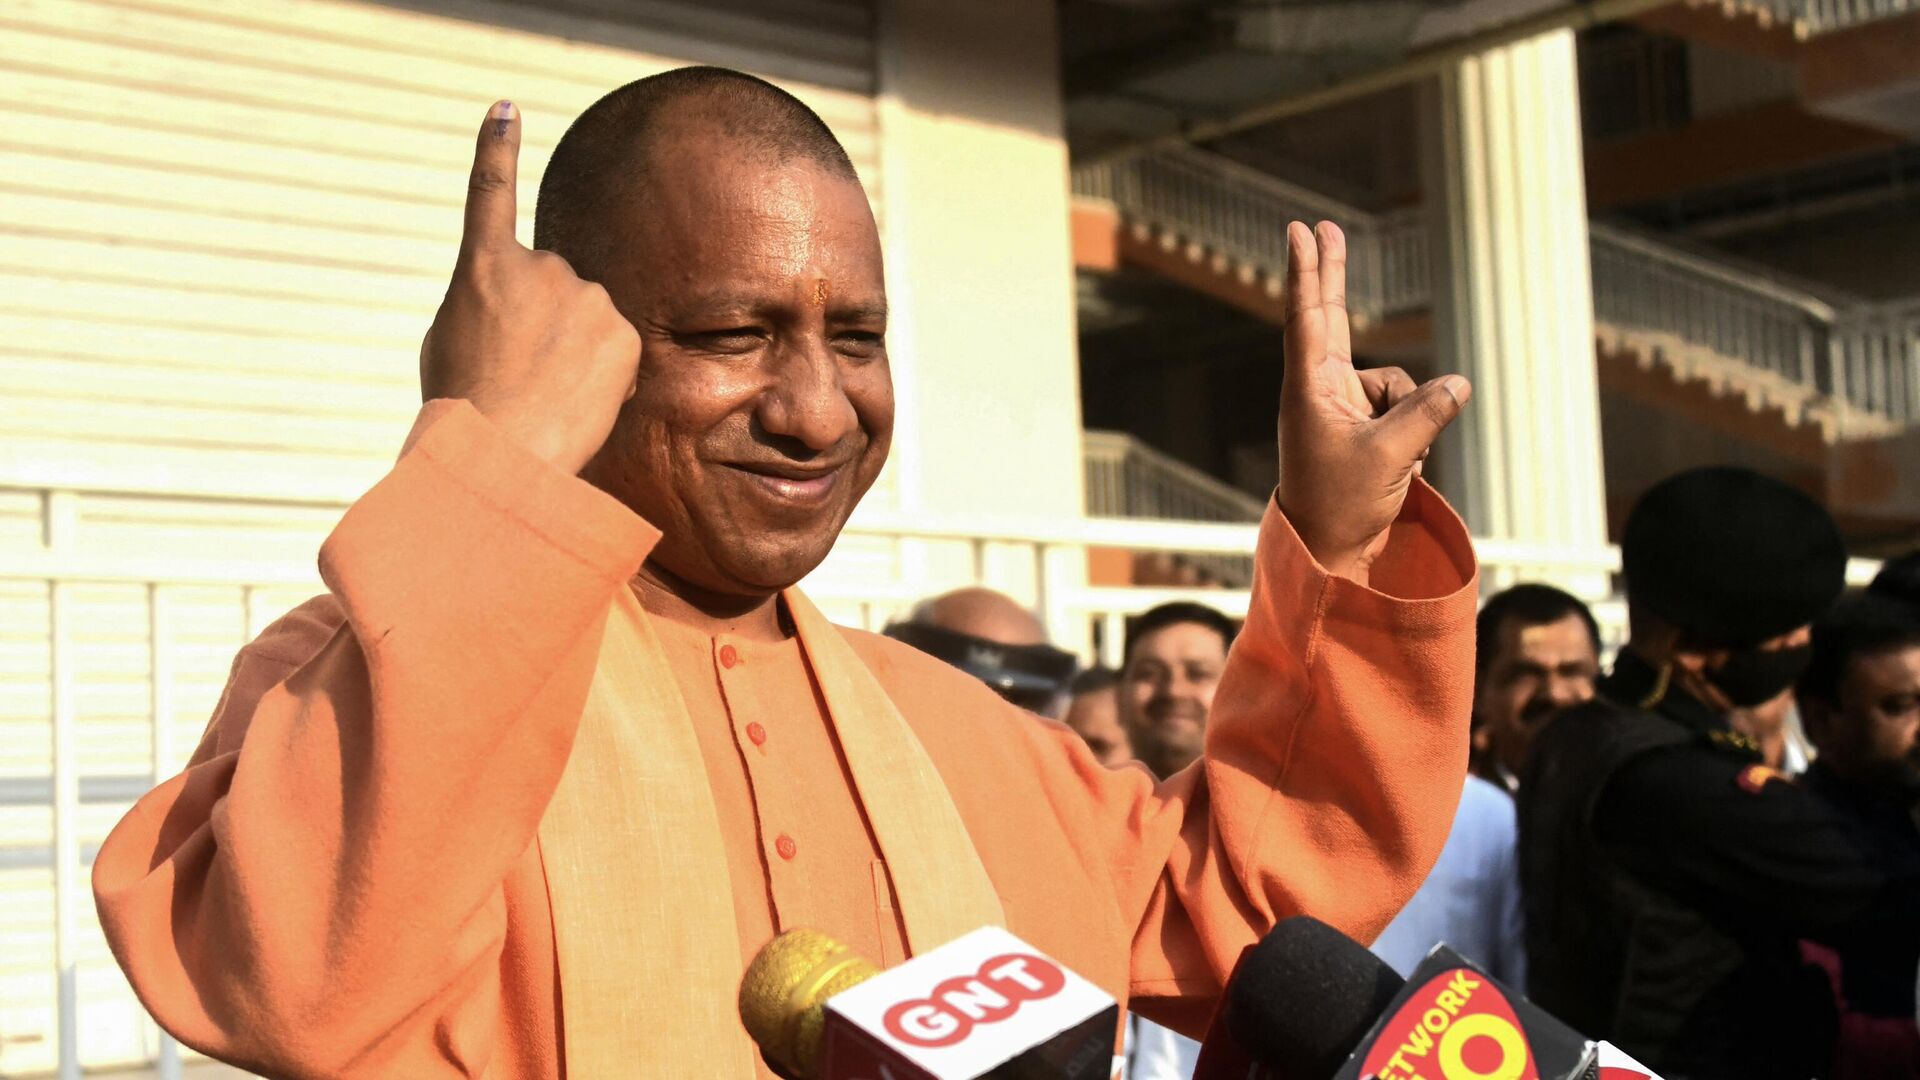 Uttar Pradesh Chief Minister Yogi Adityanath shows ink marked finger after casting his vote during the sixth phase of the Uttar Pradesh state assembly elections, in Gorakhpur on March 3, 2022. (Photo by AFP) - Sputnik India, 1920, 05.01.2023